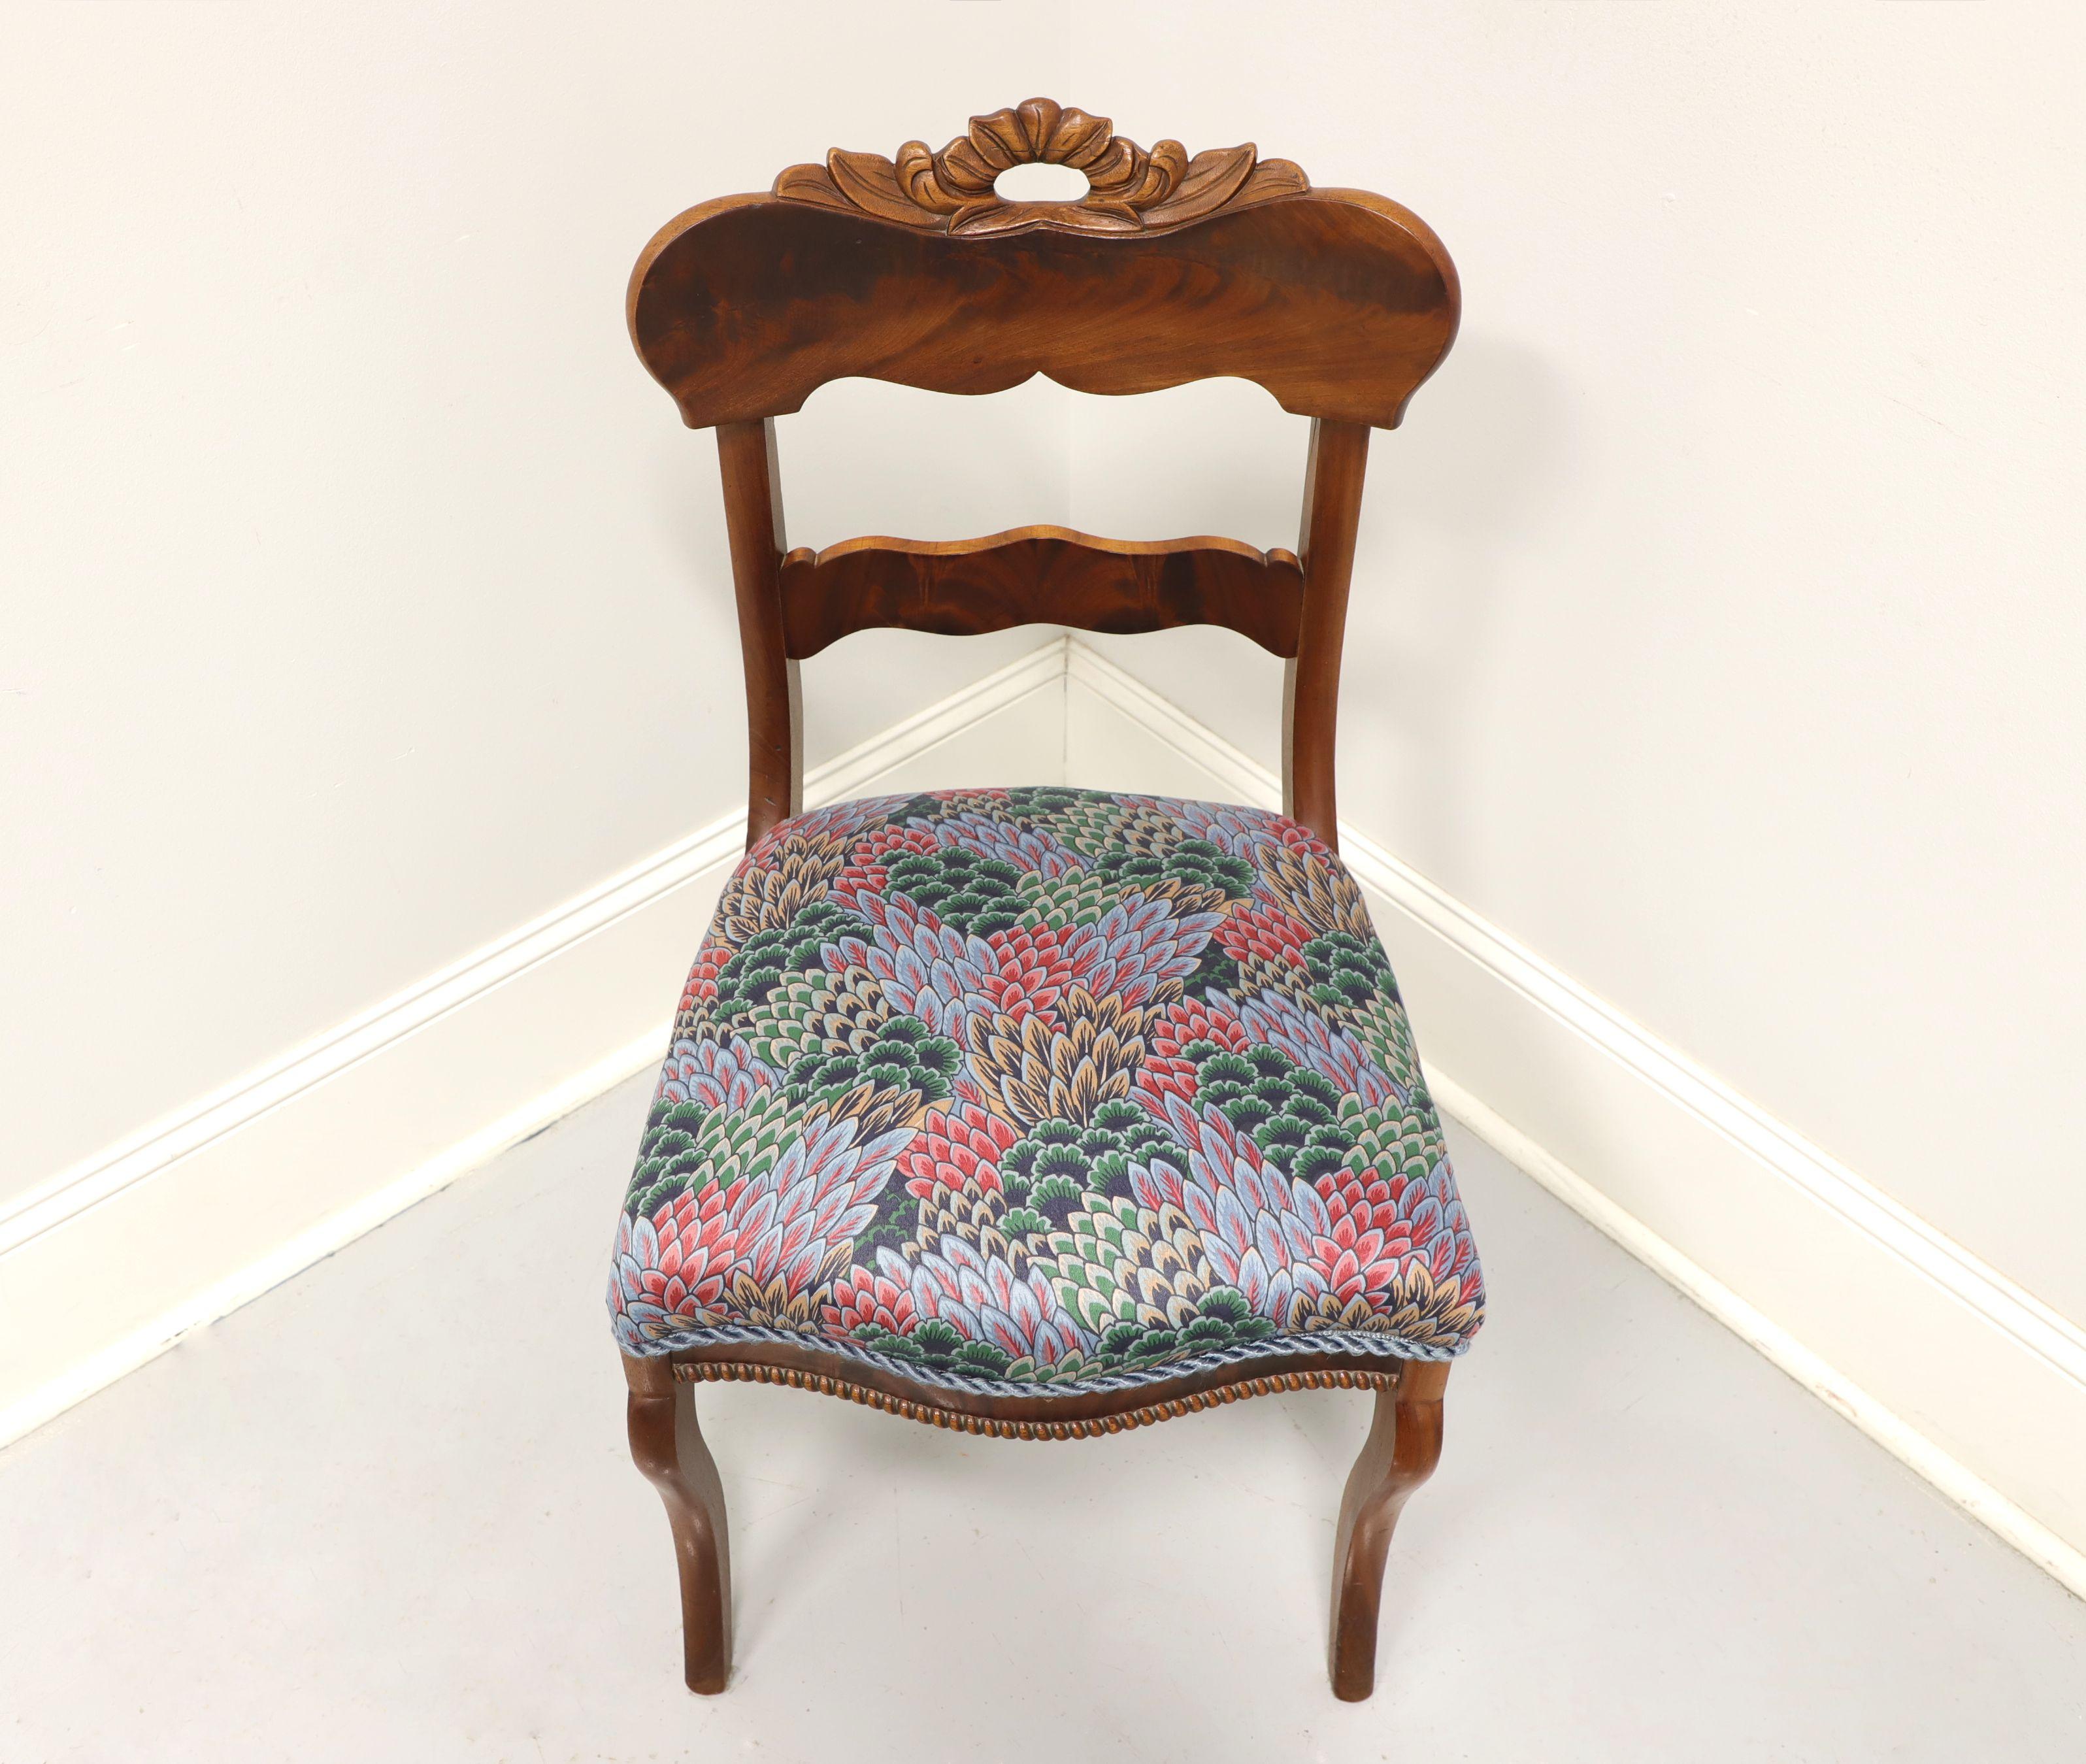 An antique Victorian style side chair, unbranded. Solid walnut with decoratively carved open crest rail, curved back rest, floral fabric upholstered seat, decorative beading to apron and curved legs. Like made in the USA, in the late 19th